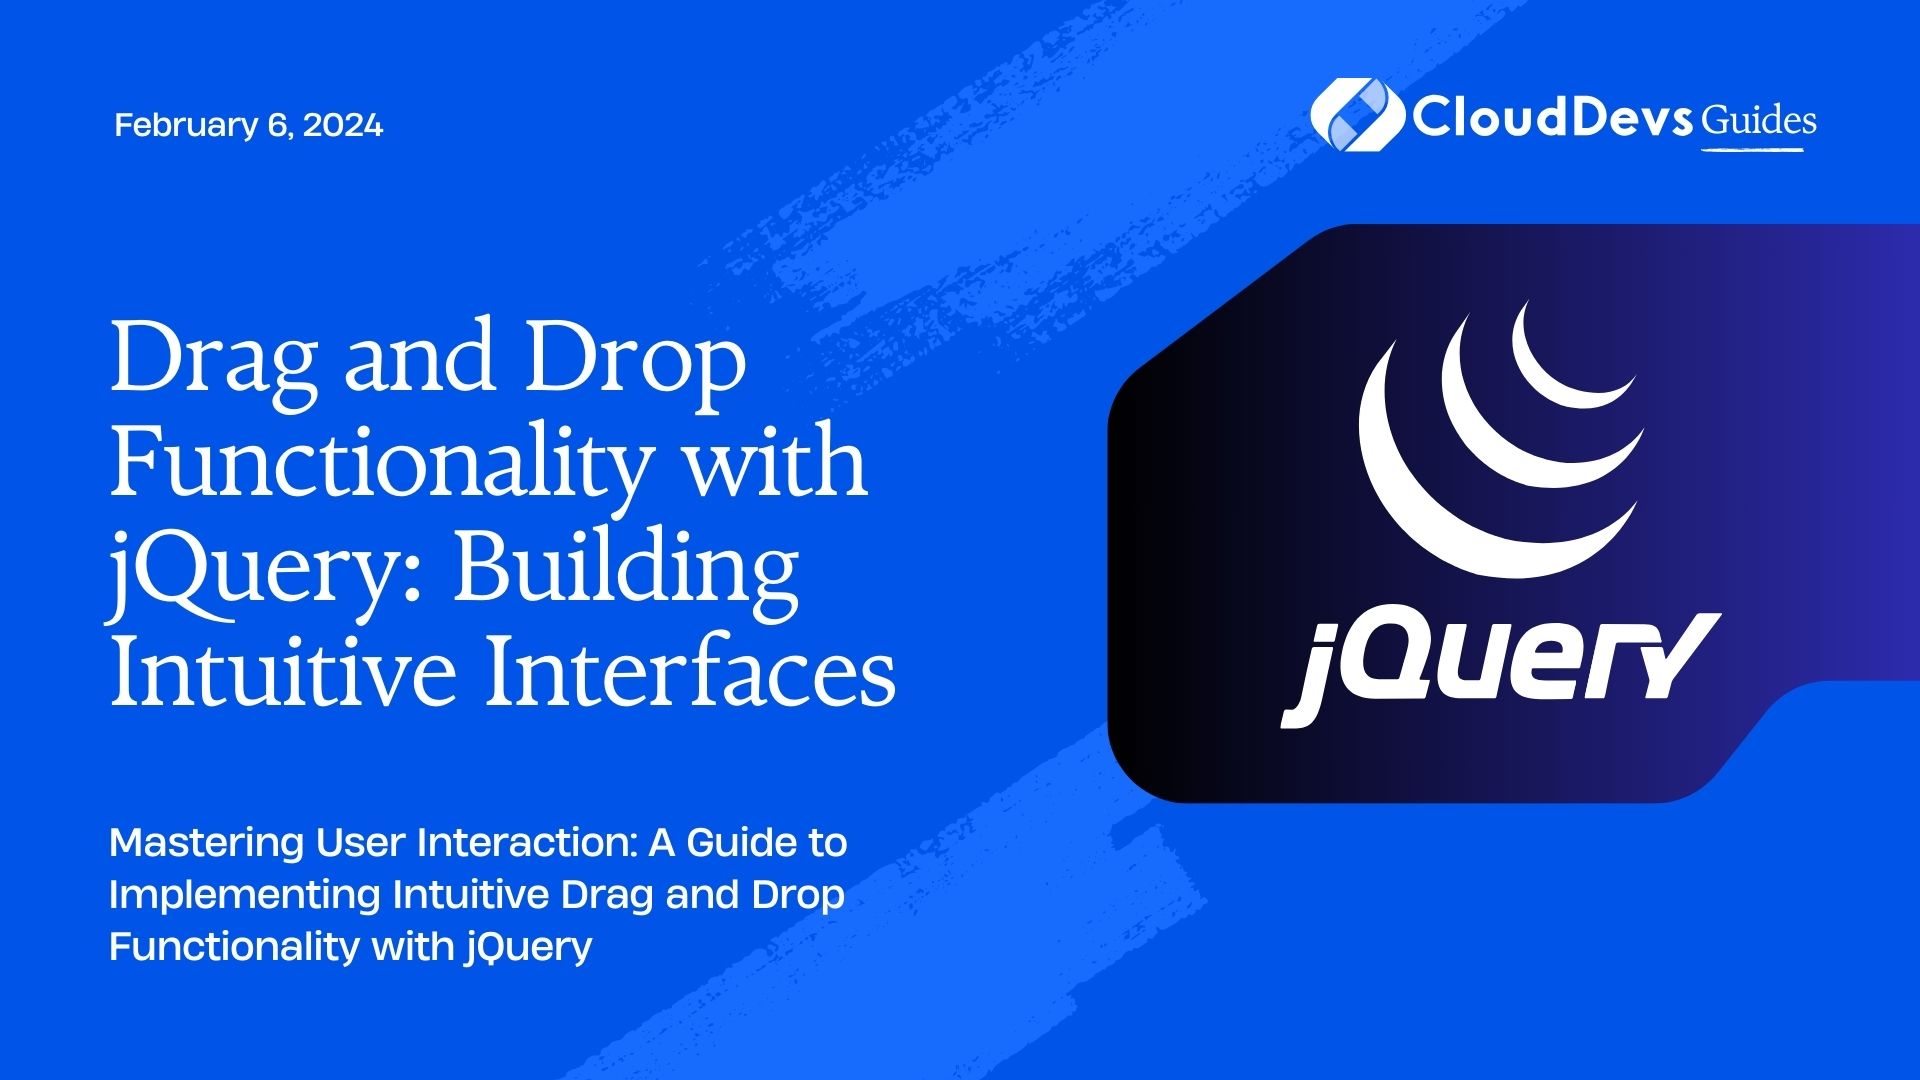 Drag and Drop Functionality with jQuery: Building Intuitive Interfaces